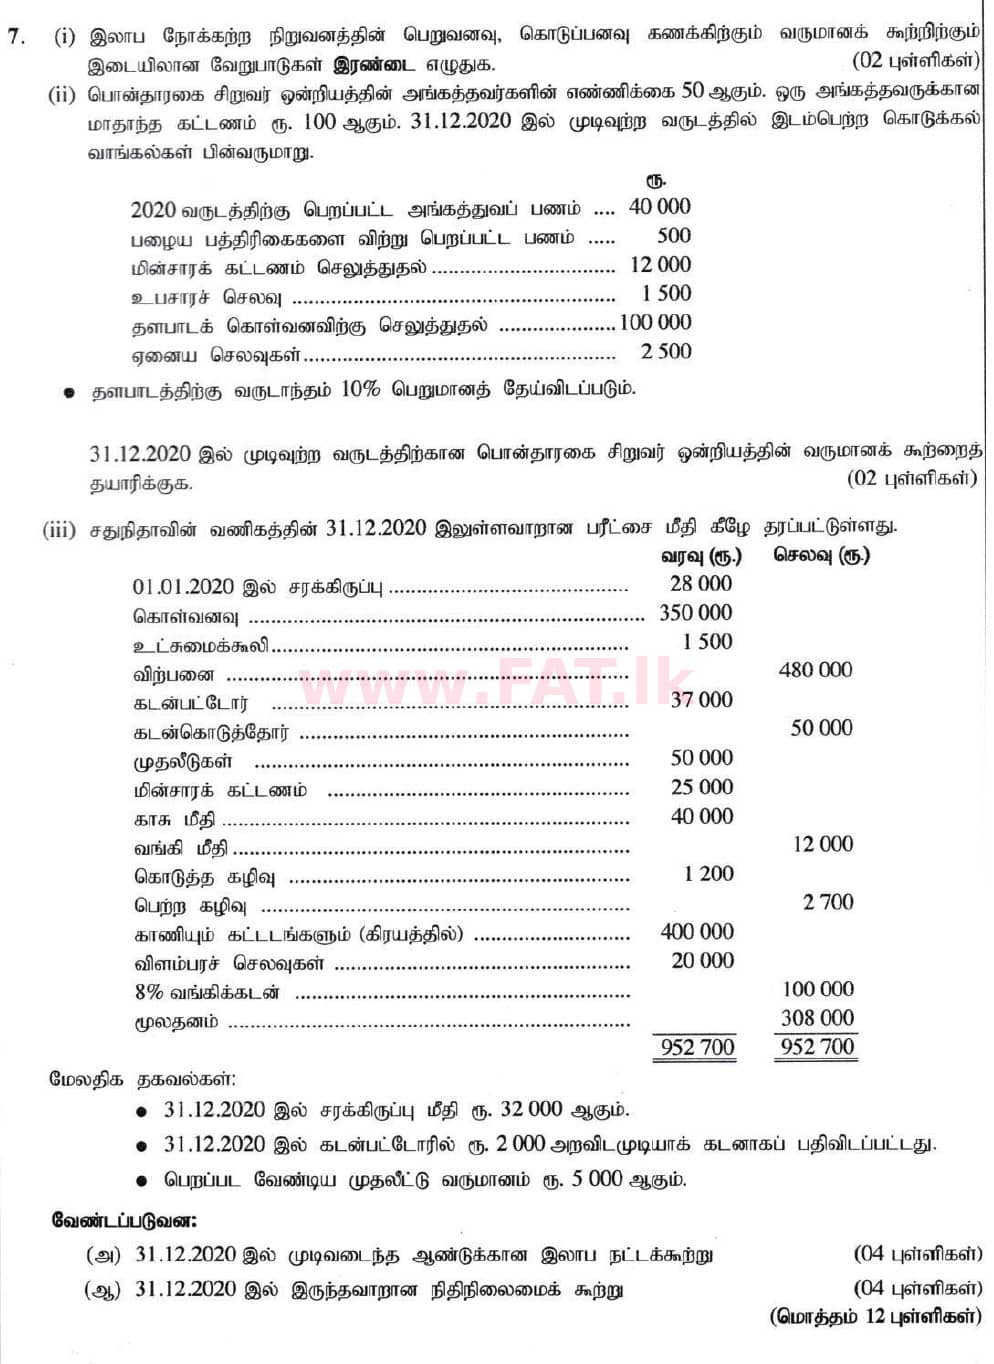 National Syllabus : Ordinary Level (O/L) Business and Accounting Studies - 2020 March - Paper II (தமிழ் Medium) 7 1